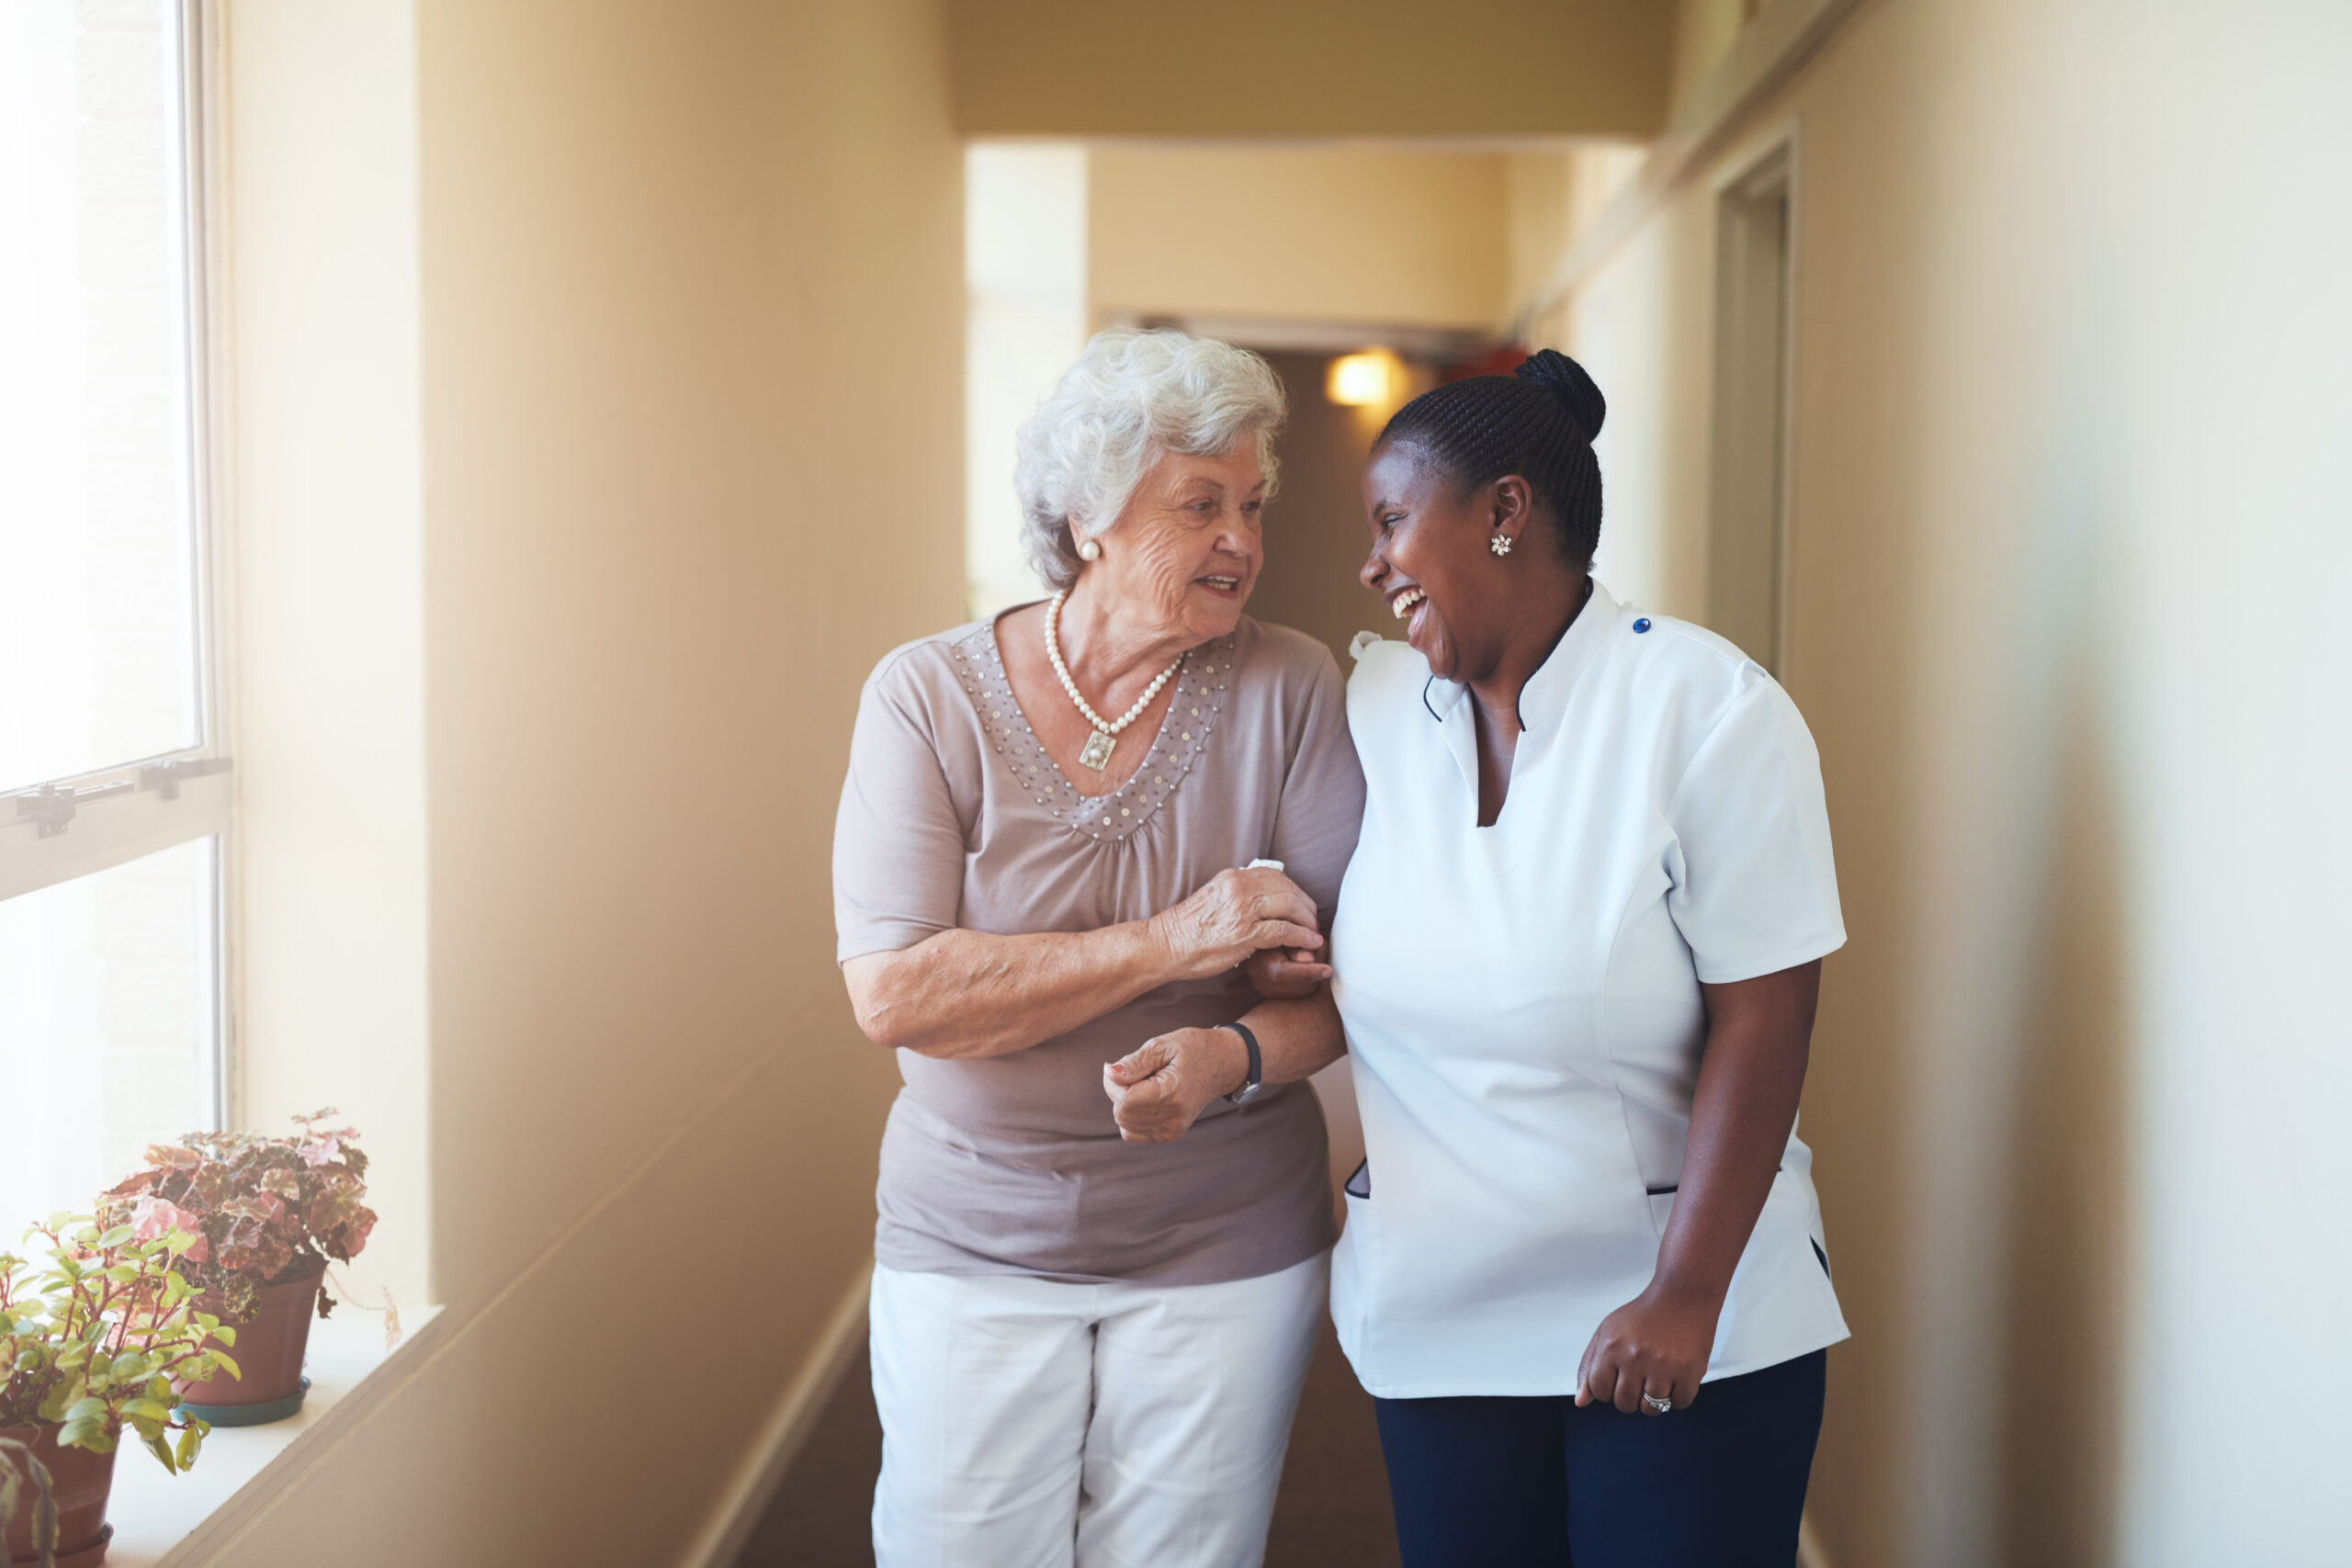 Elderly woman being guided by a healthcare professional through a hallway, symbolizing assistance with Medicare.